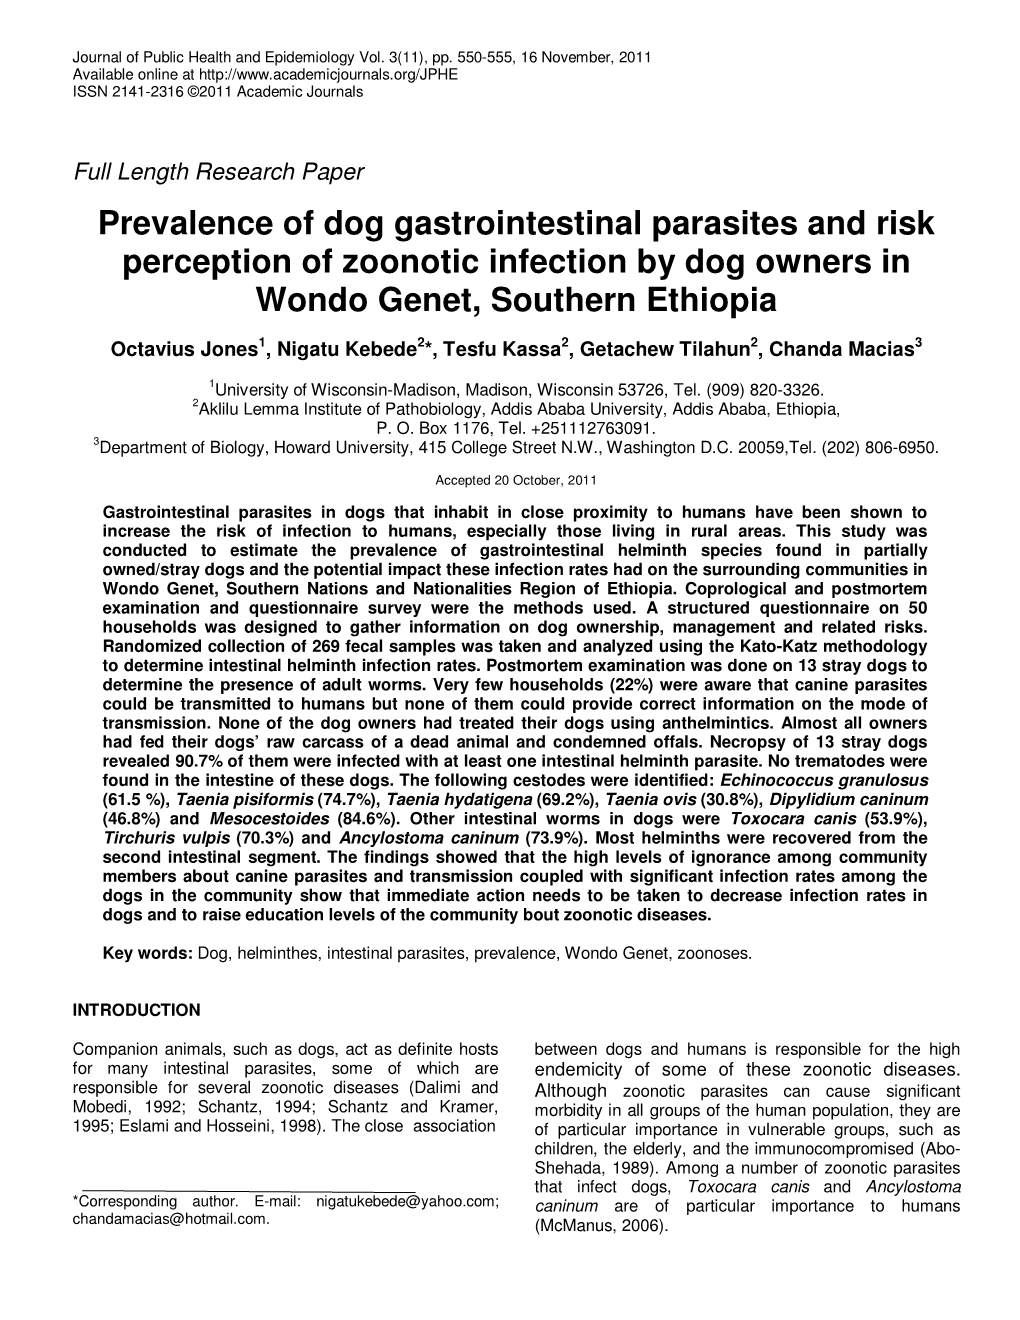 Prevalence of Dog Gastrointestinal Parasites and Risk Perception of Zoonotic Infection by Dog Owners in Wondo Genet, Southern Ethiopia